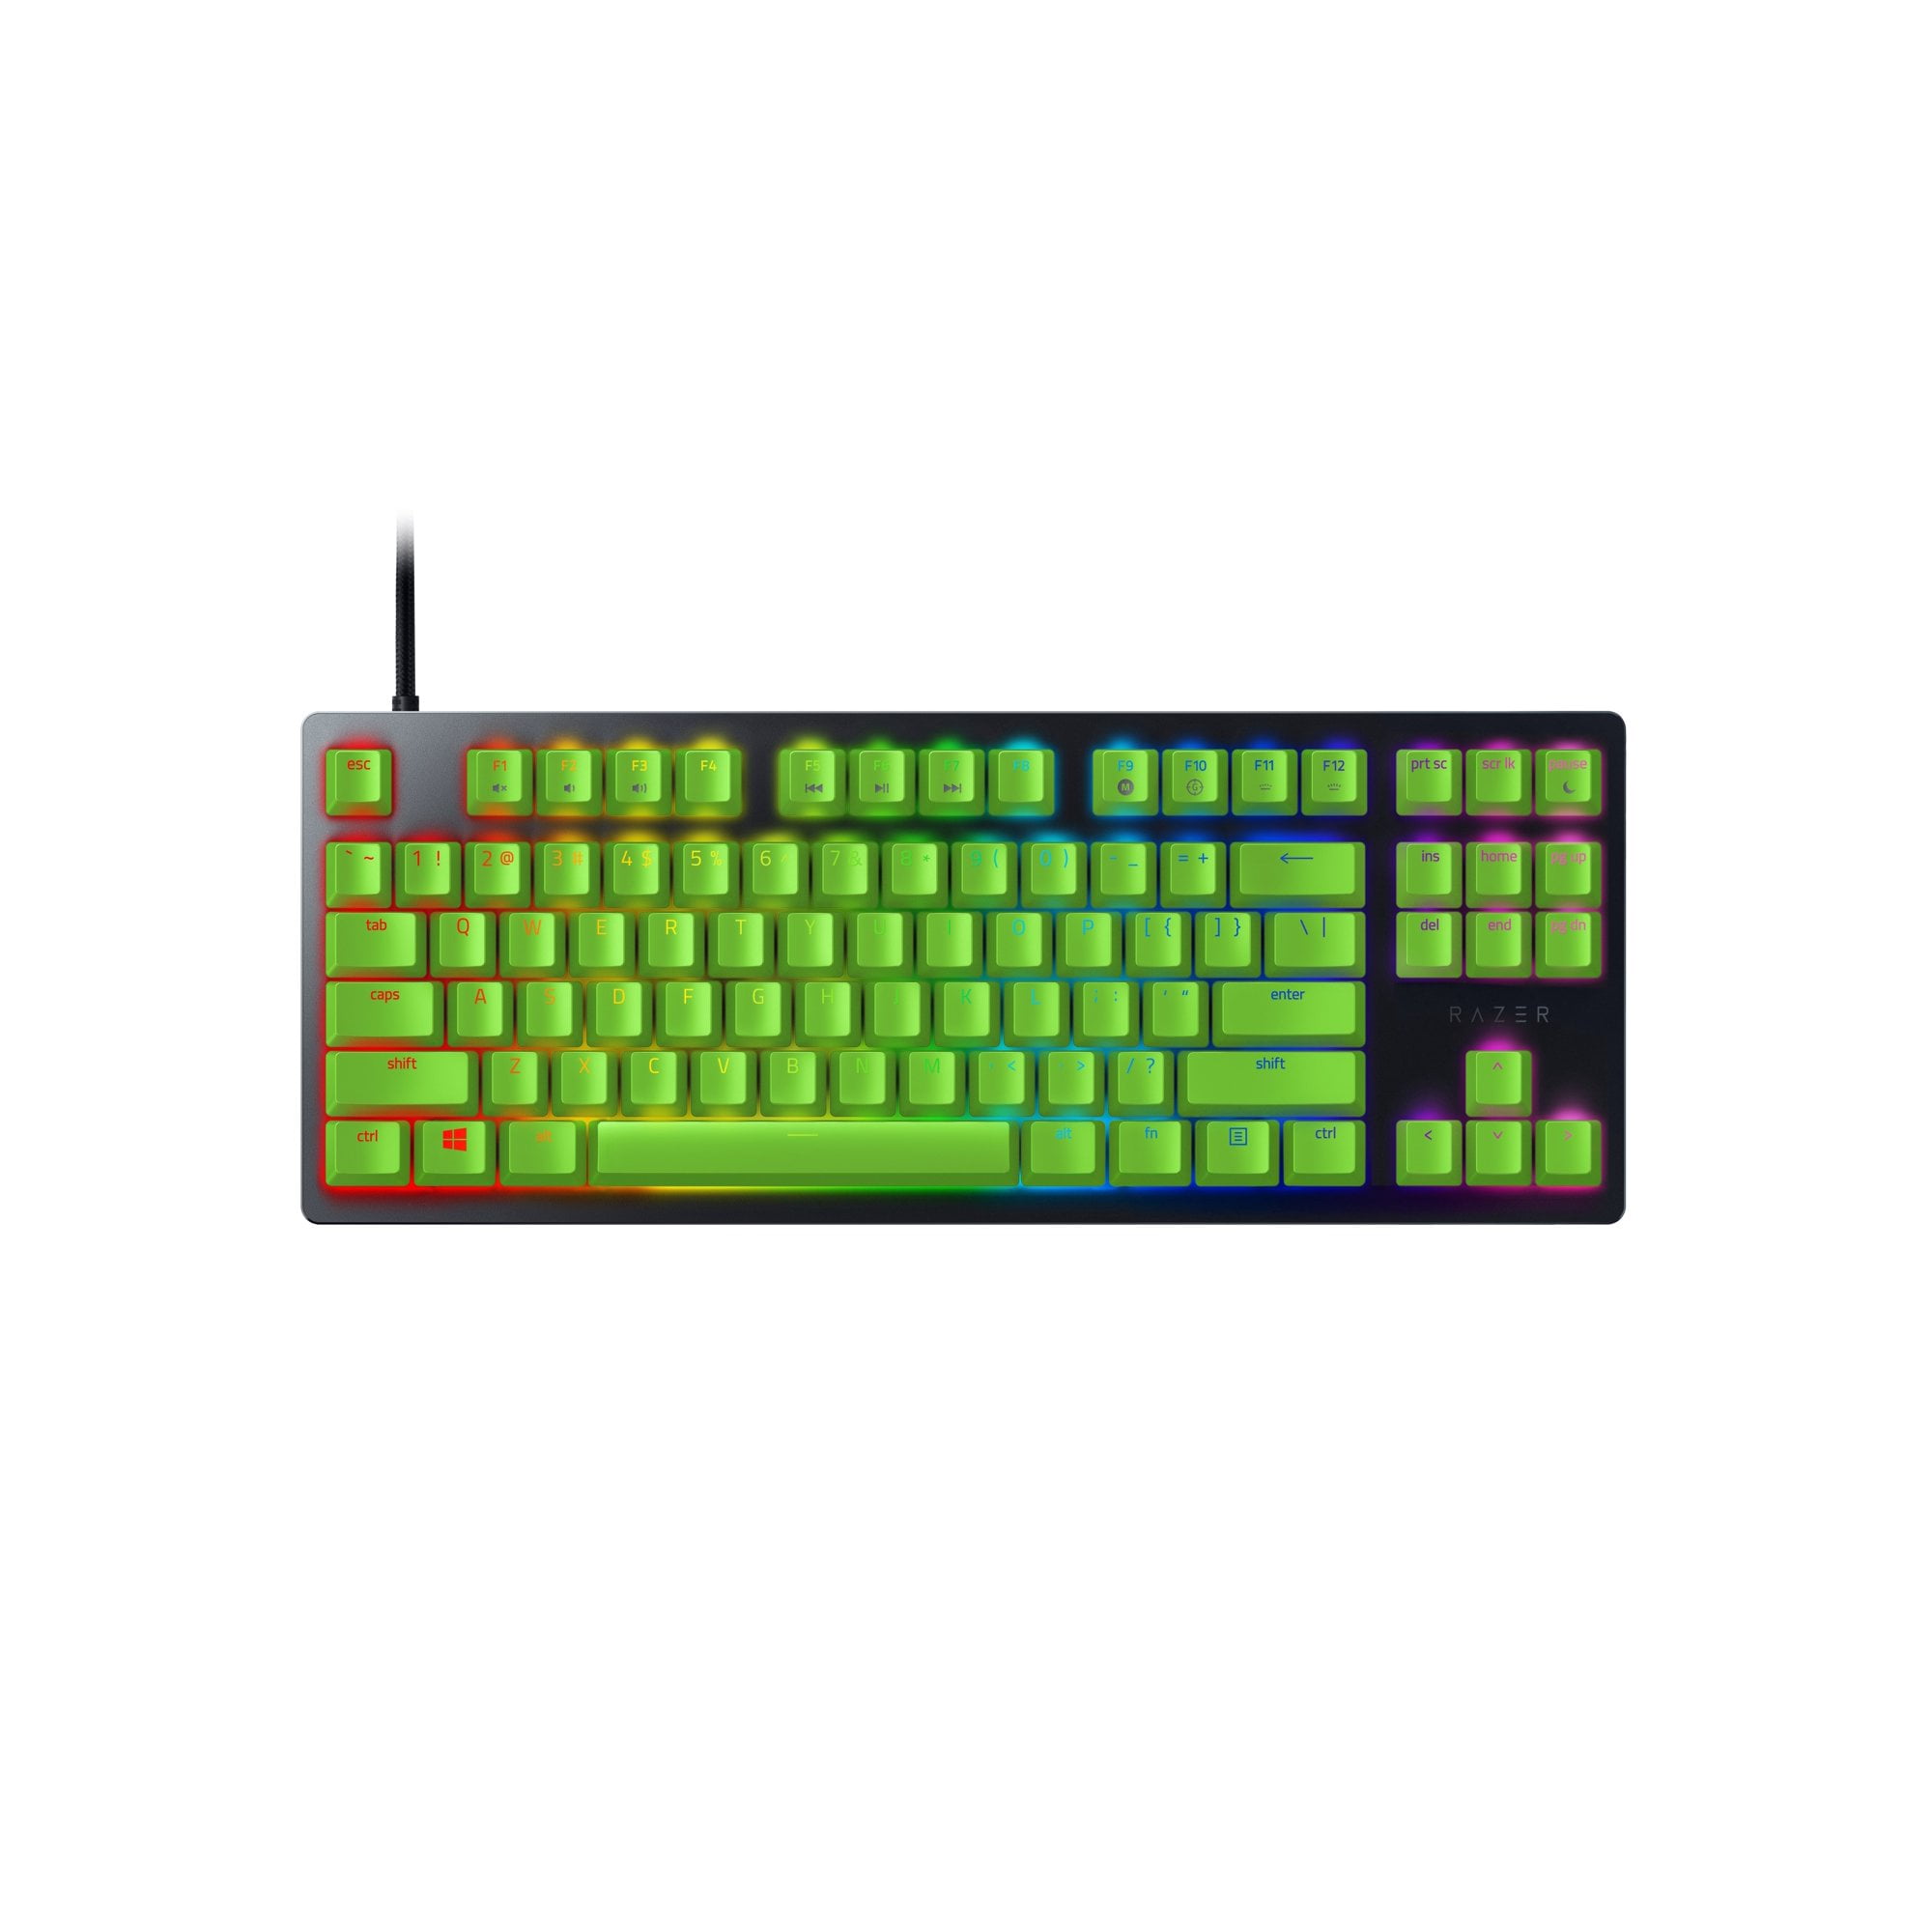 Razer Huntsman Tournament Edition - Compact Gaming Keyboard with Razer  Linear Optical Switches - Green Keycaps - US Layout (Used)